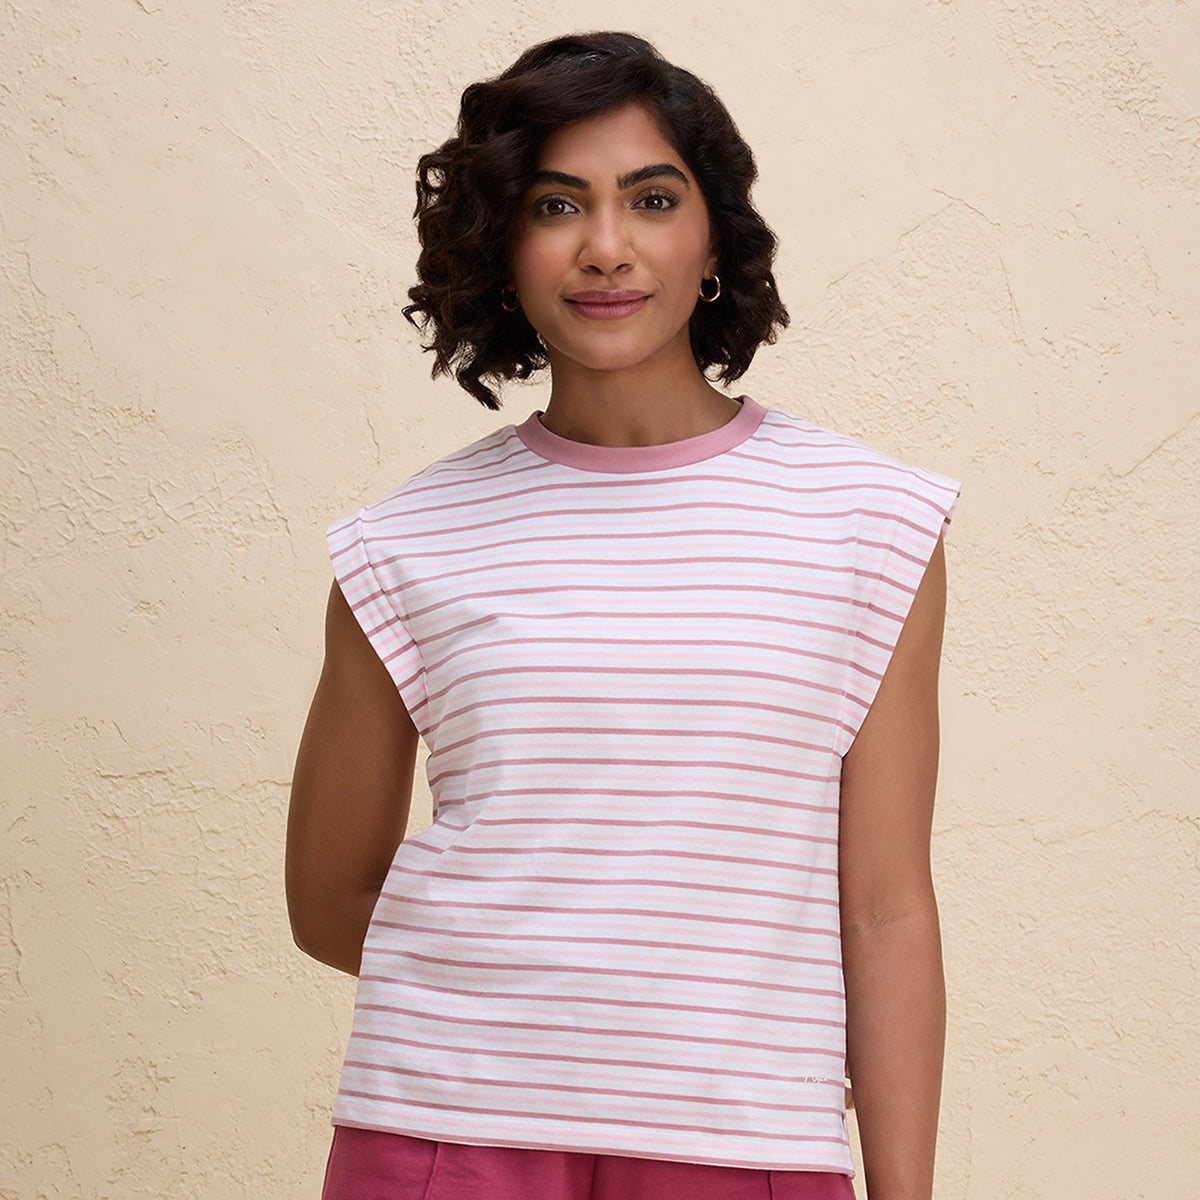 Nykd By Nykaa Extended Shoulder Cotton Tank Top with 2 Degree Cooling Tech-NYLE514-Pink White